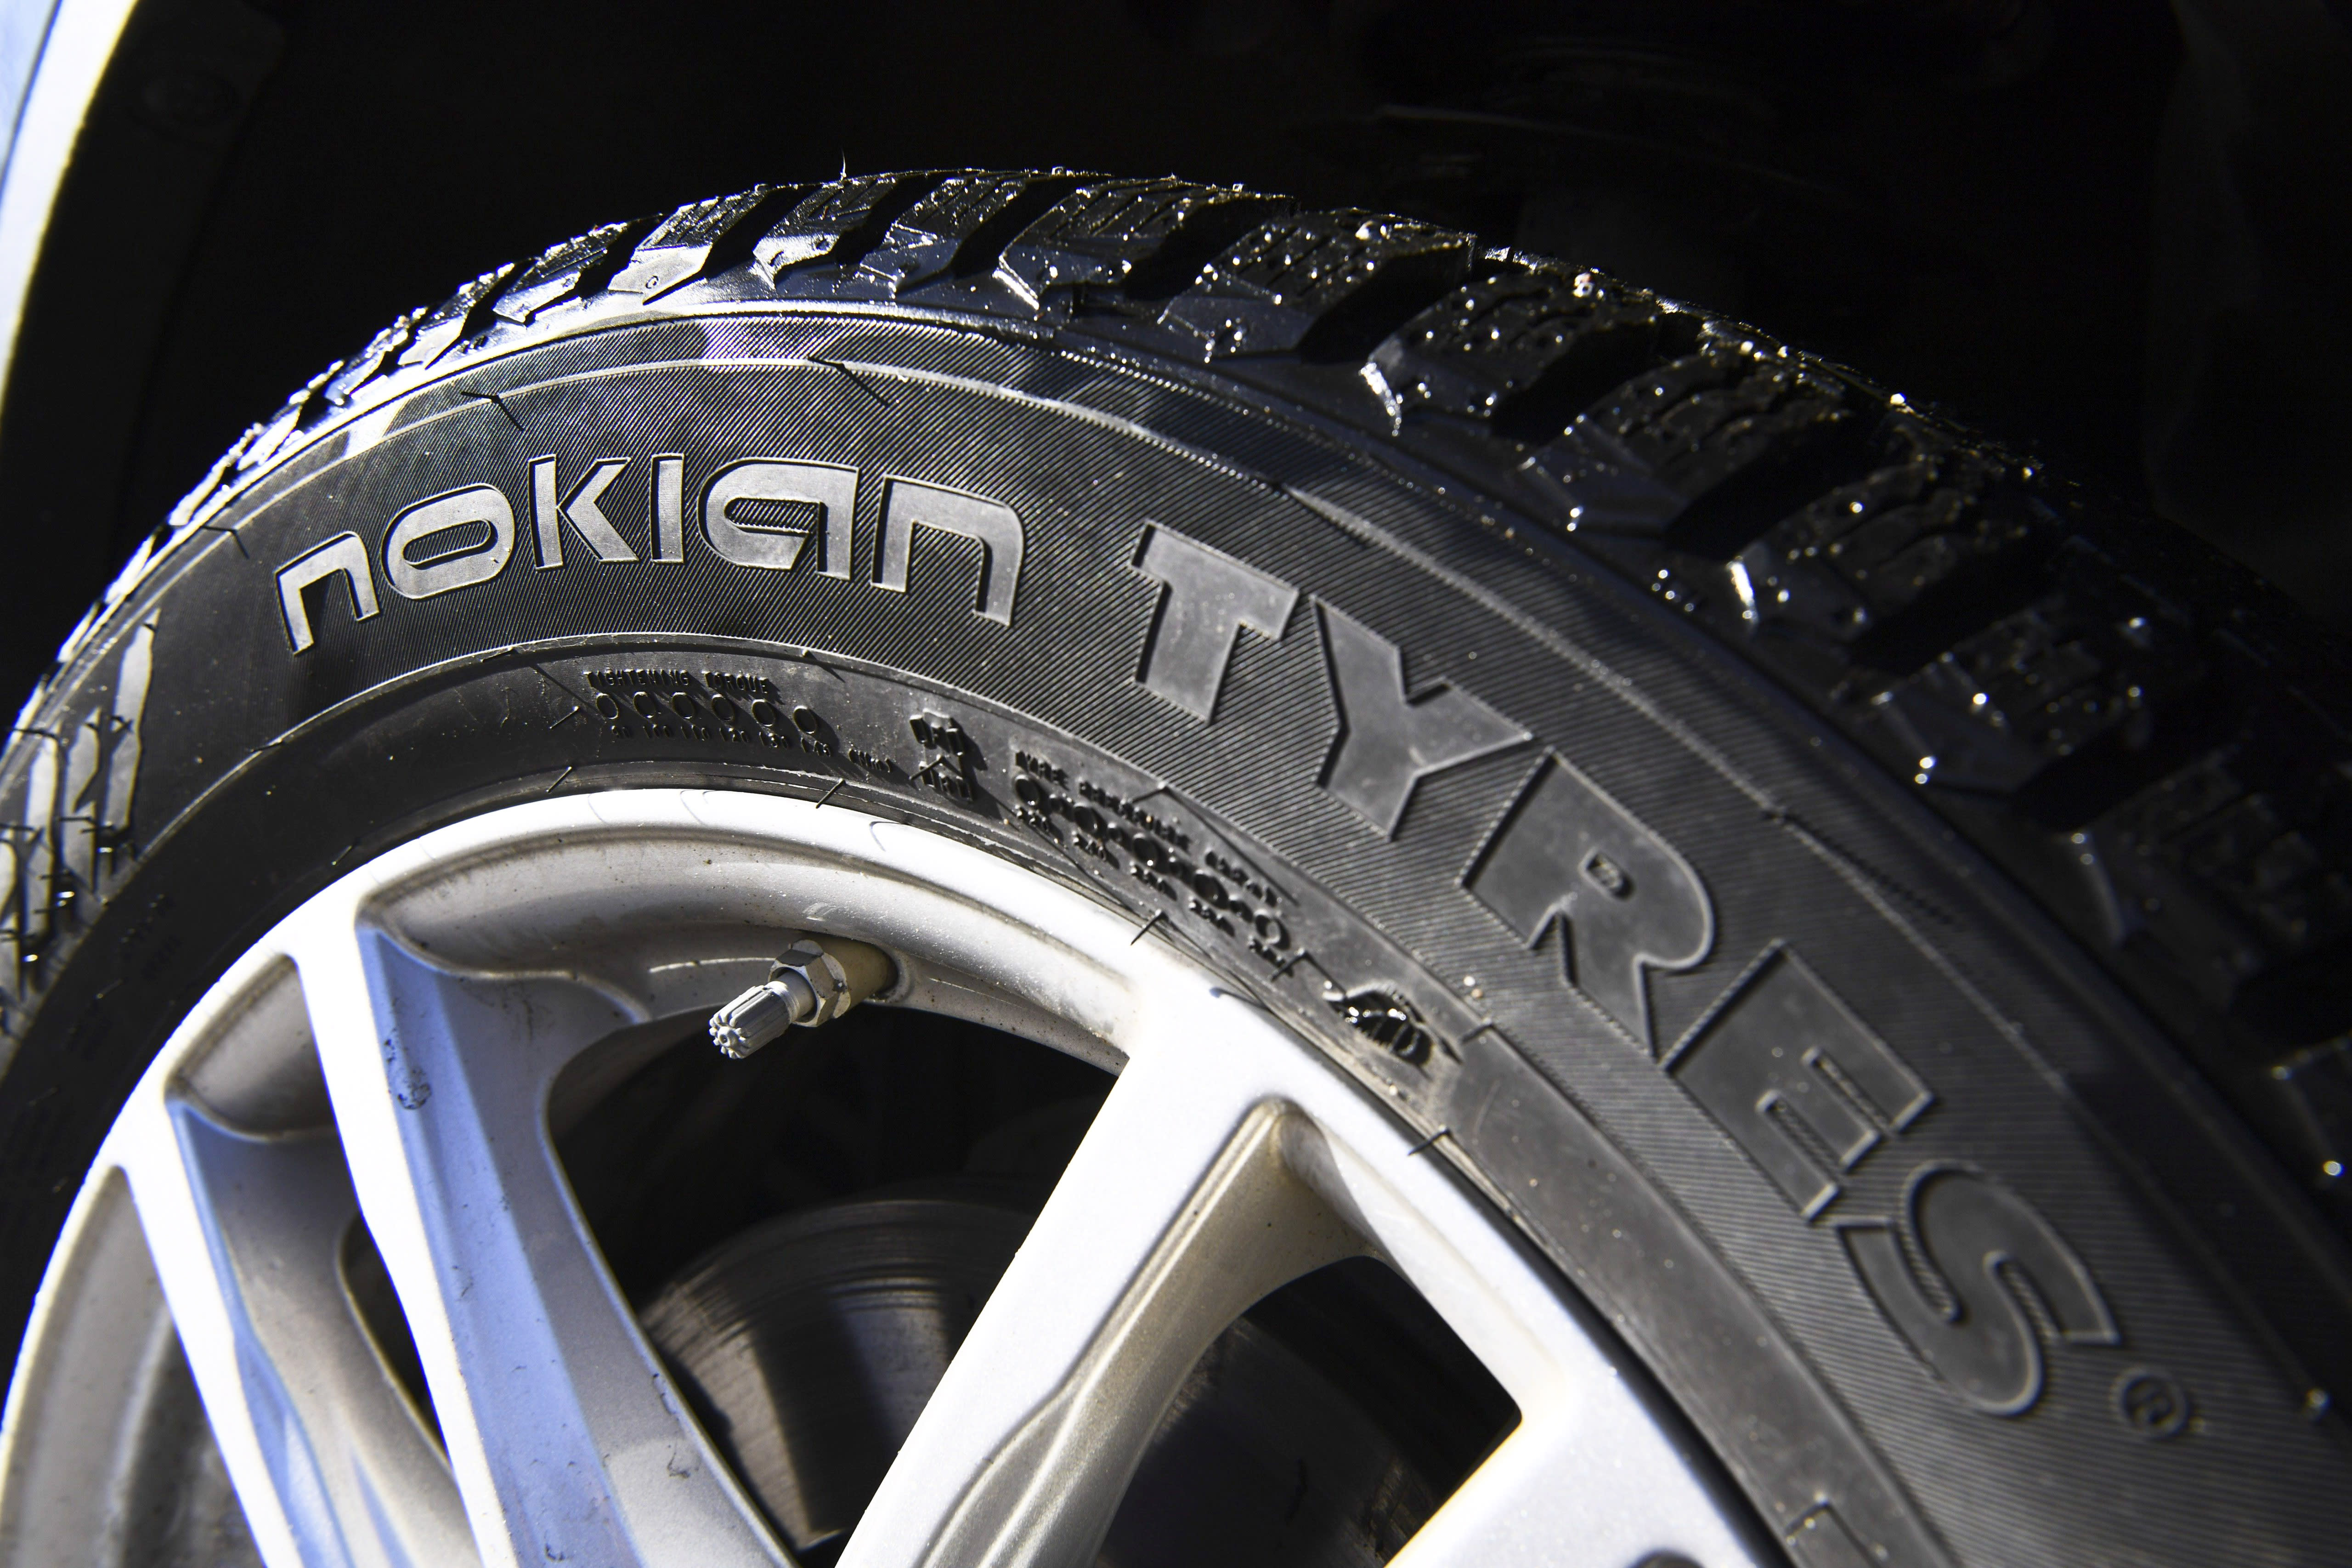 New EU sanctions restrict Nokian Tires’ imports from Russia